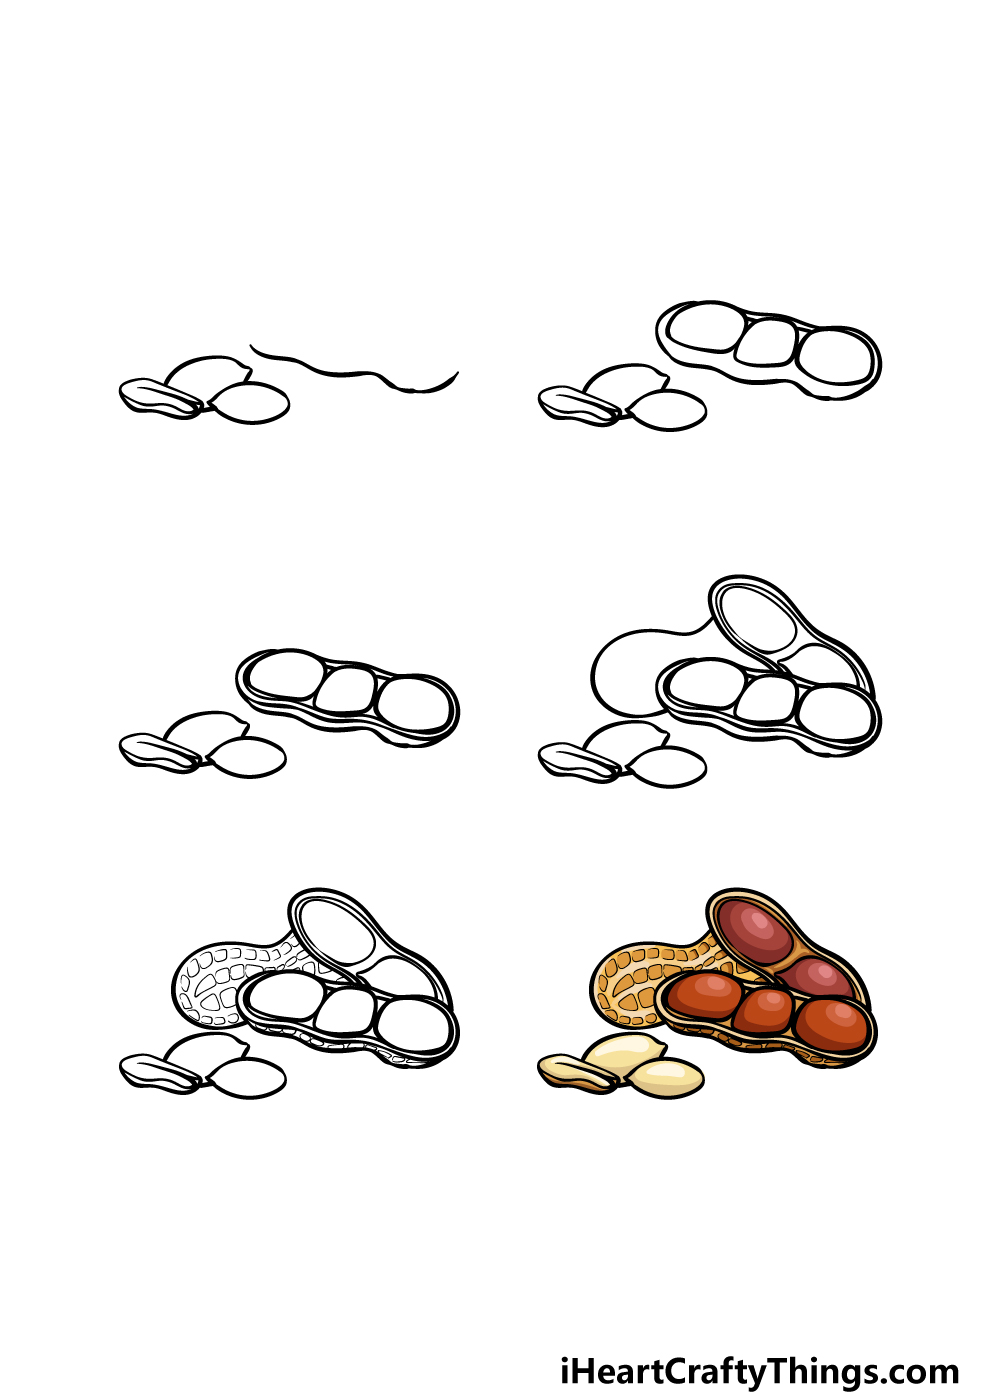 how to draw a peanut in 6 steps